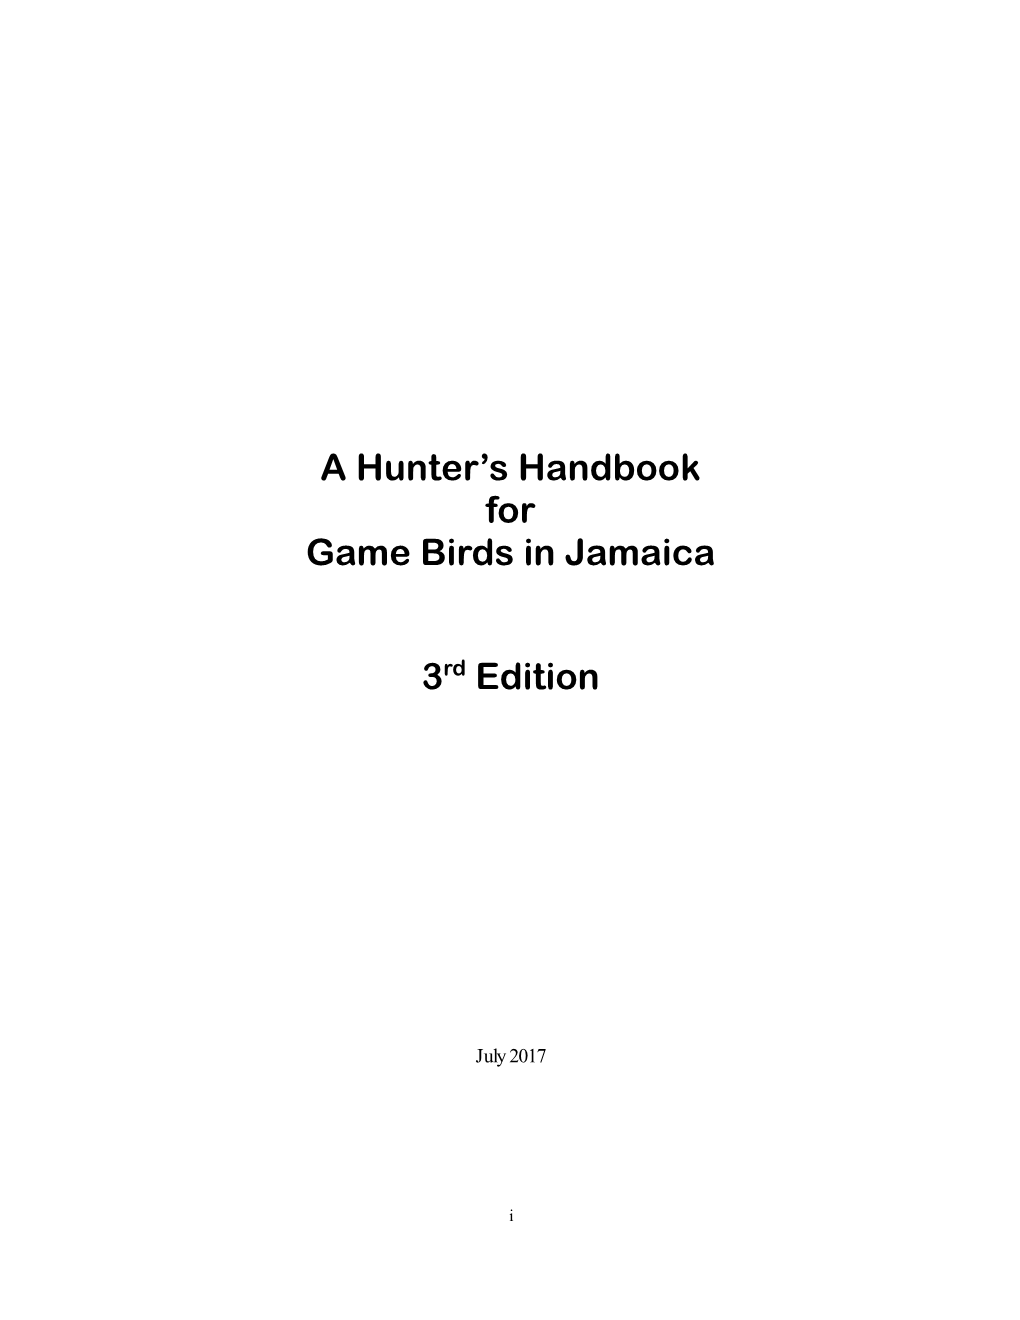 A Hunter's Handbook for Game Birds in Jamaica 3Rd Edition